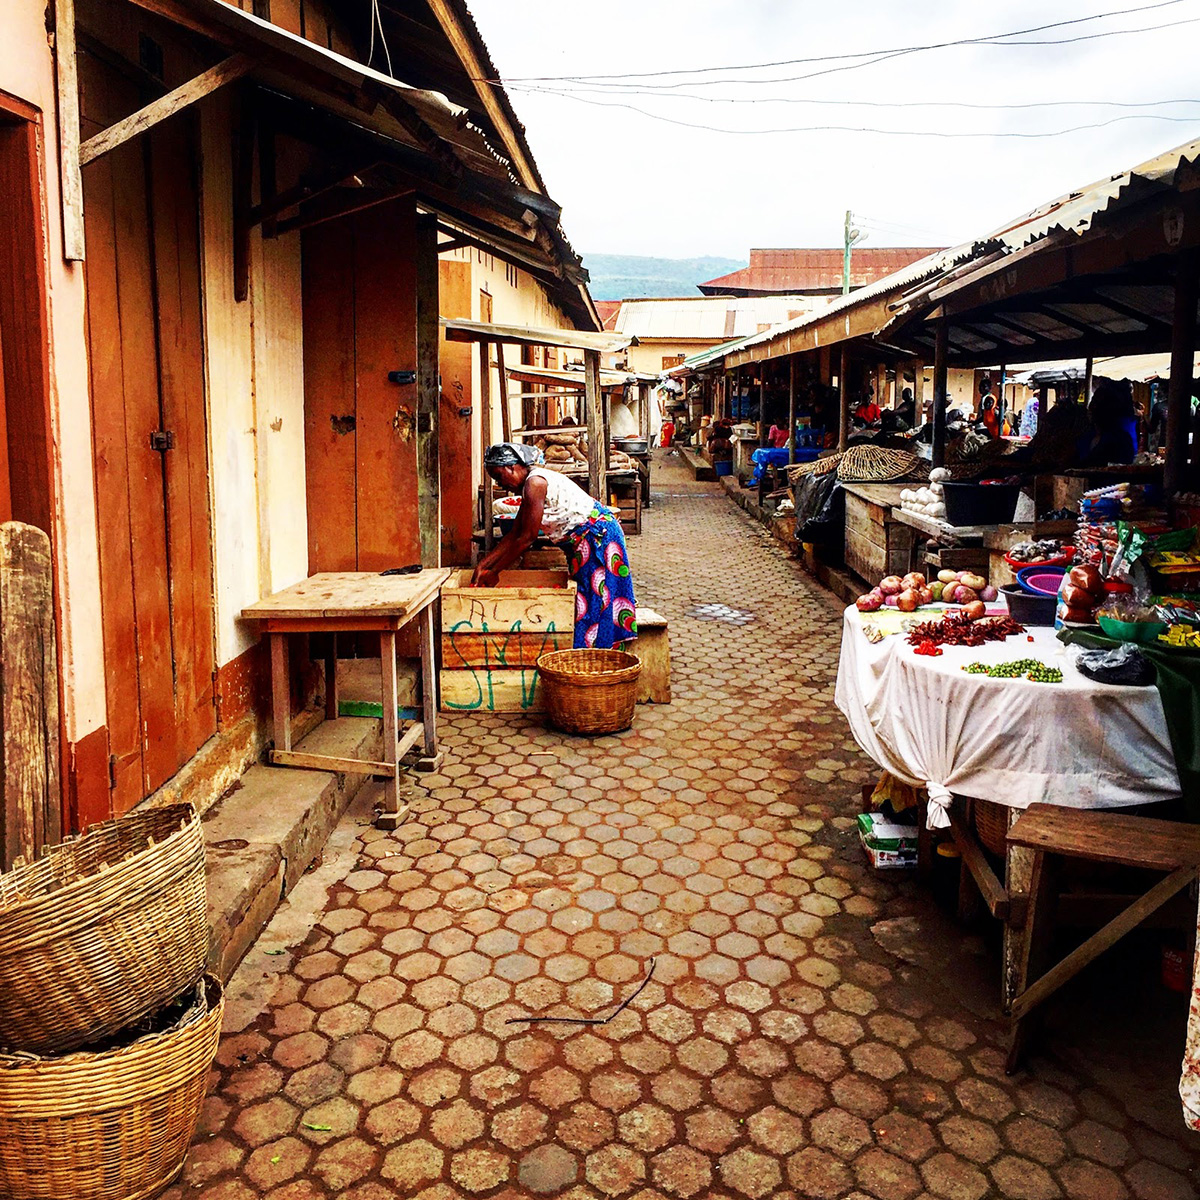 Wooden buildings and market stalls in Ghana with a woman reaching into a box.